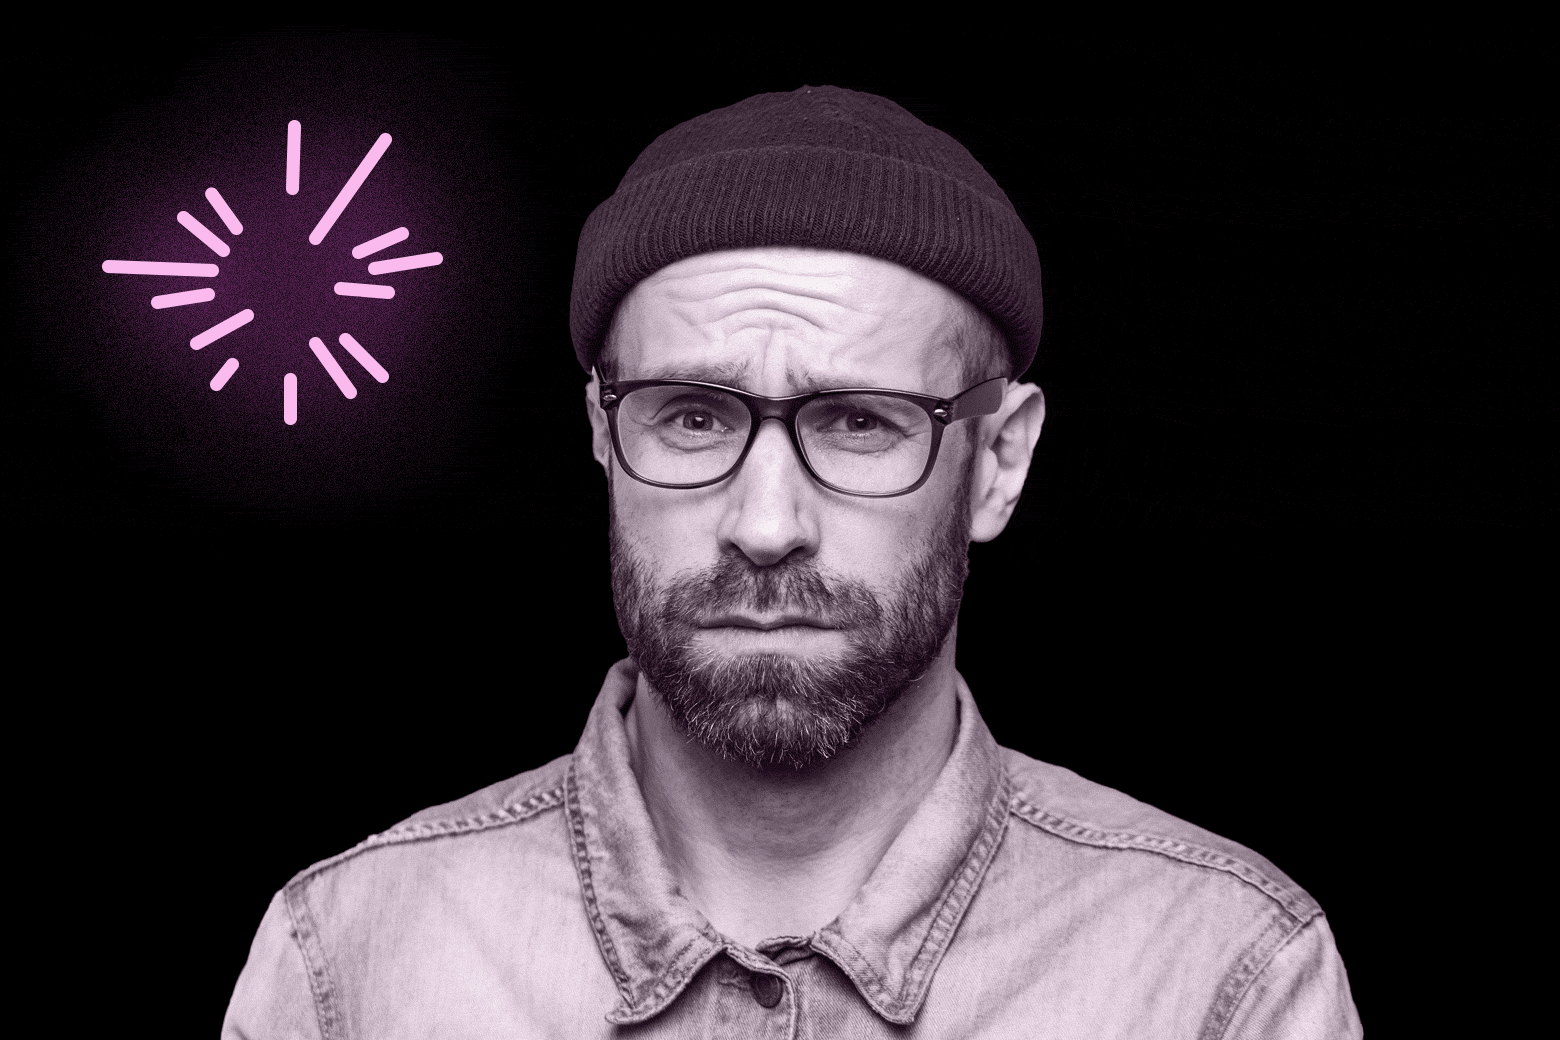 Man in a beanie and glasses staring at the camera with fireworks going off around him.